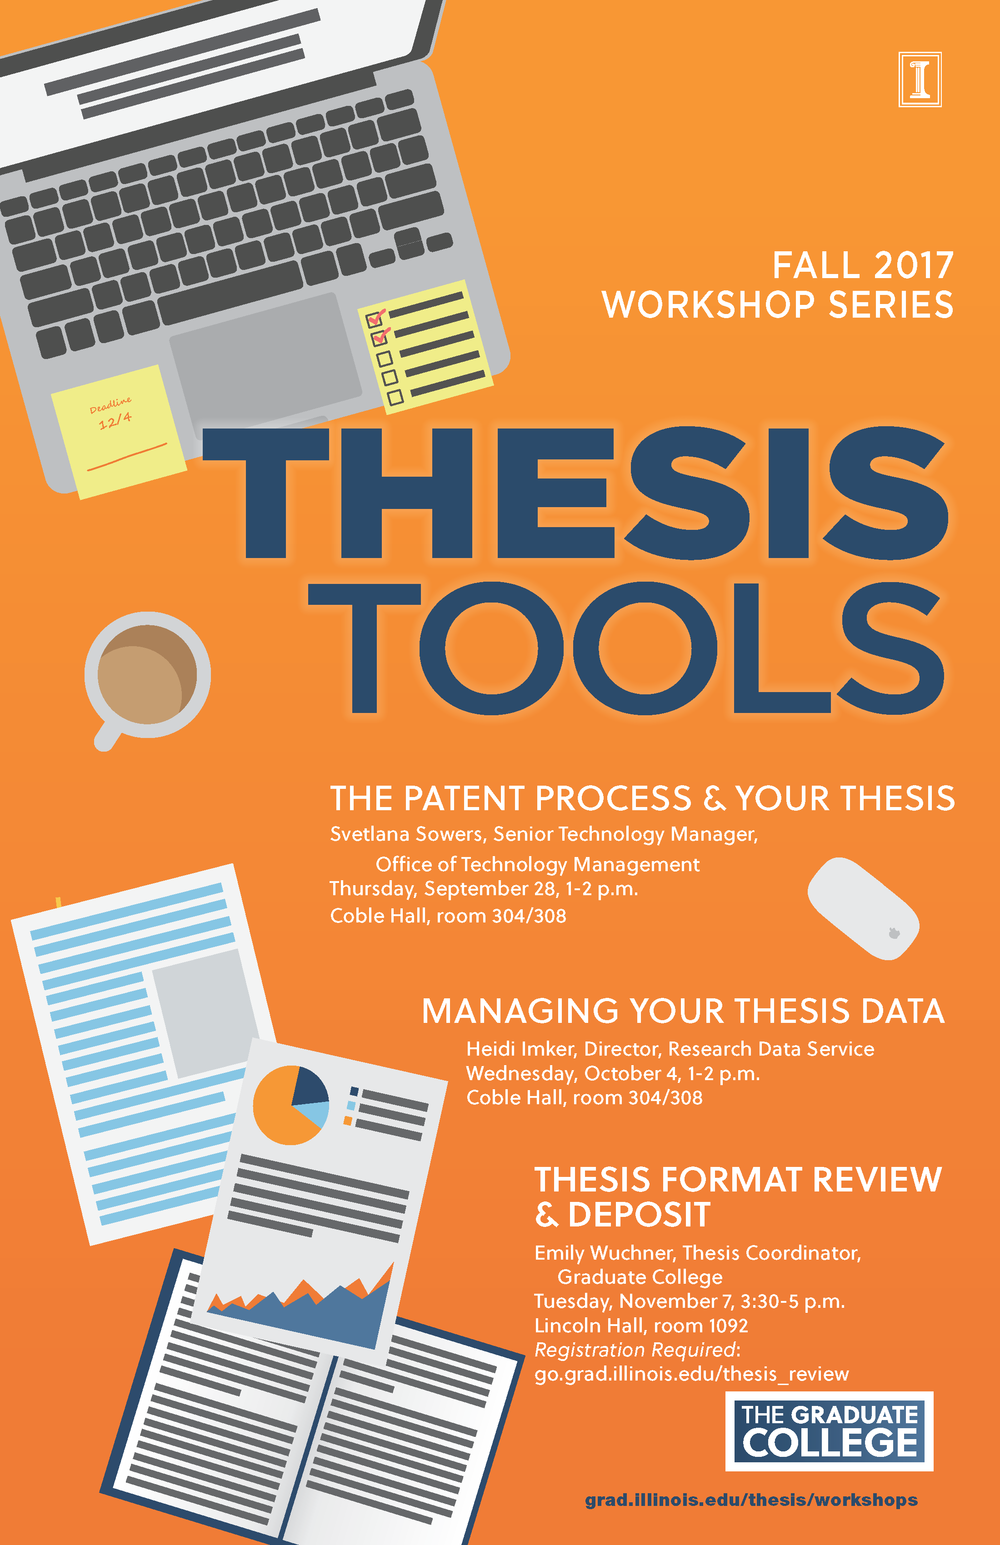 2017 Fall Thesis Tools Workshops